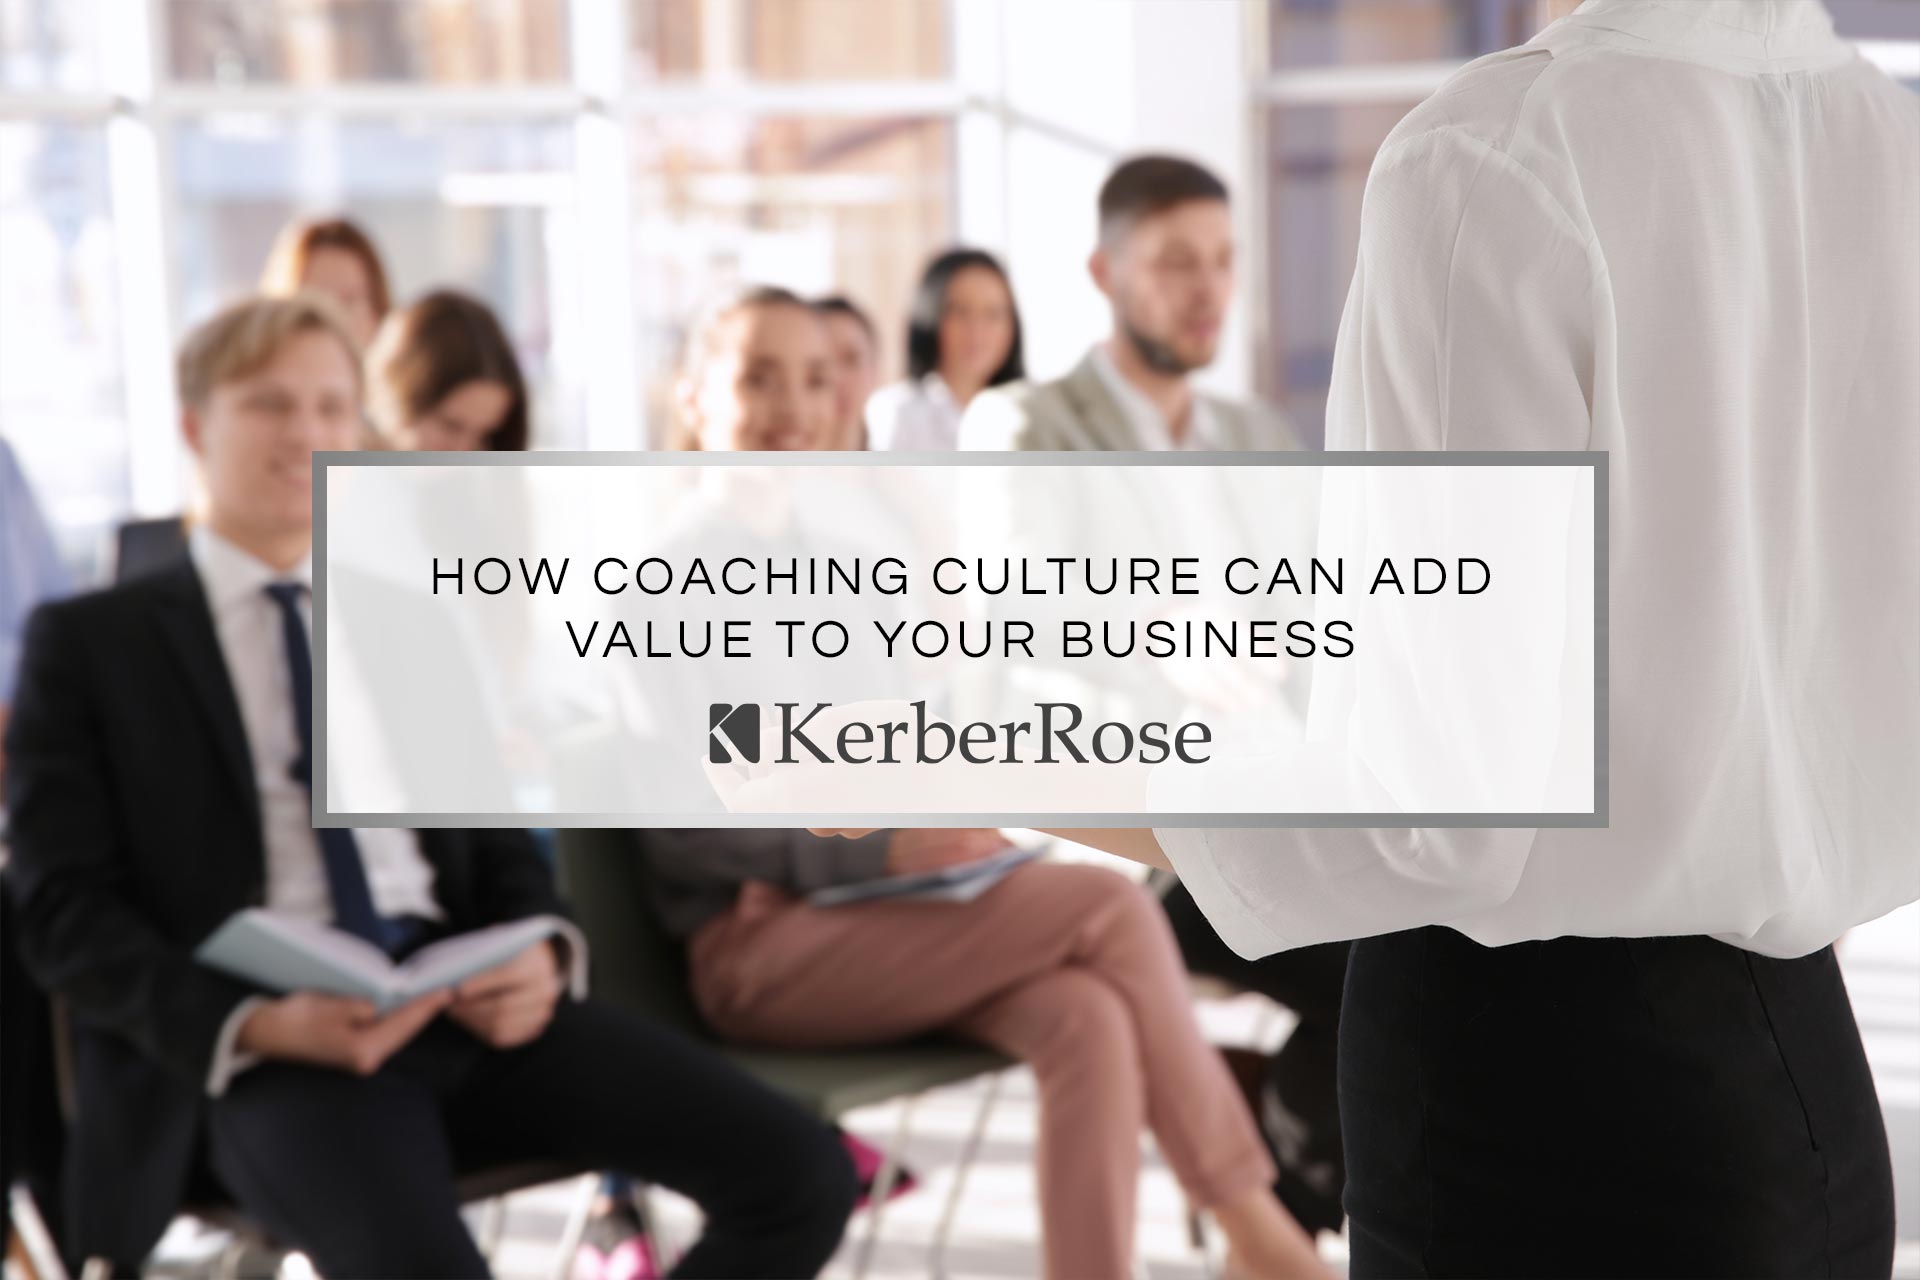 How Coaching Culture Can Add Value to Your Business | Kerberrose